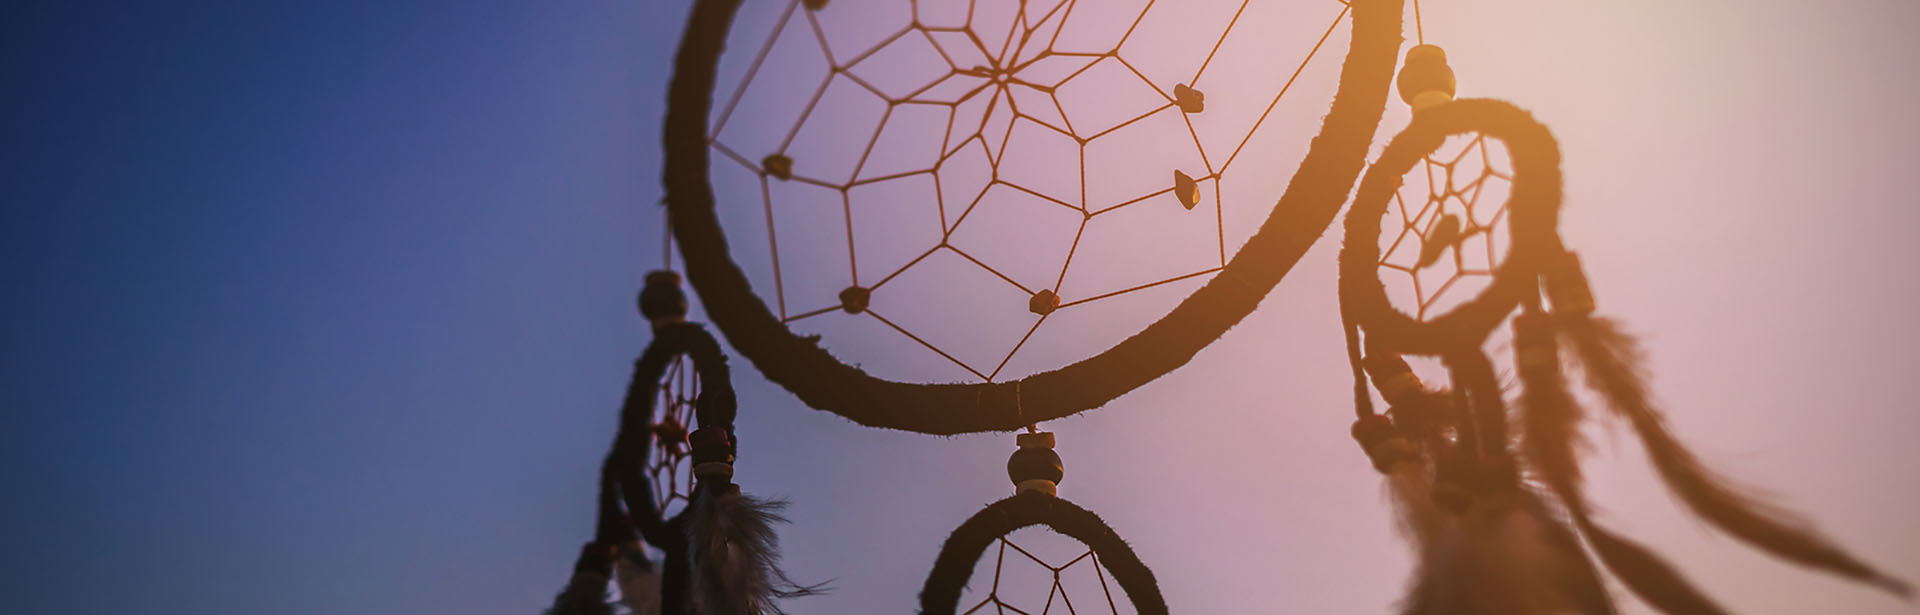 Dream catcher in the wind with beautiful  sunset, Ethnic amulet